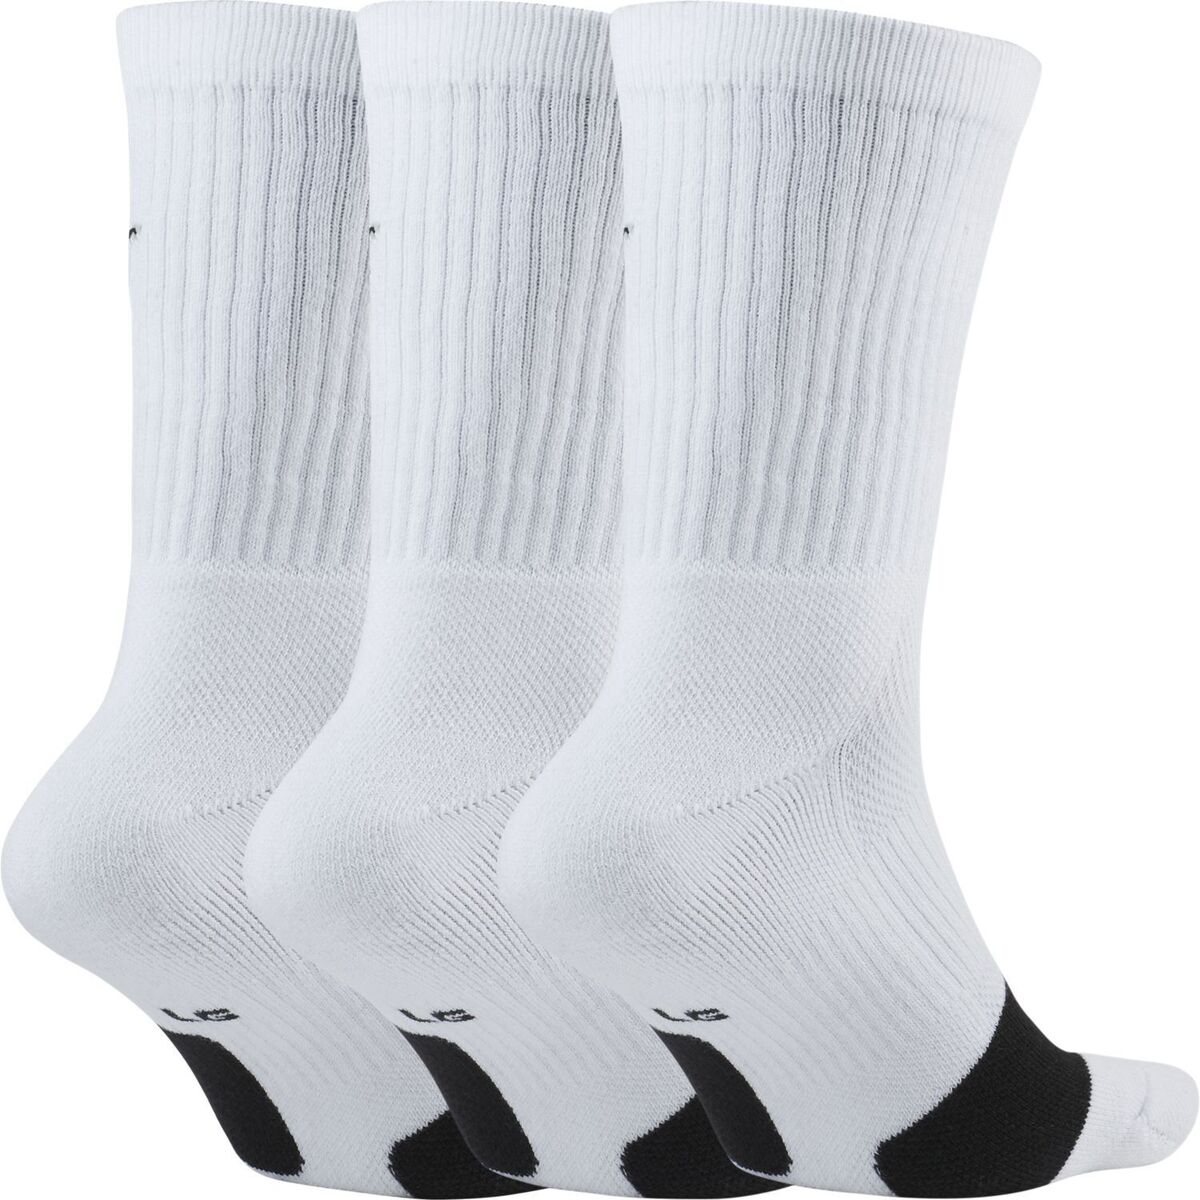 Nike Blanc Chaussettes Crew Basketball 3 Paires smKo2mzH